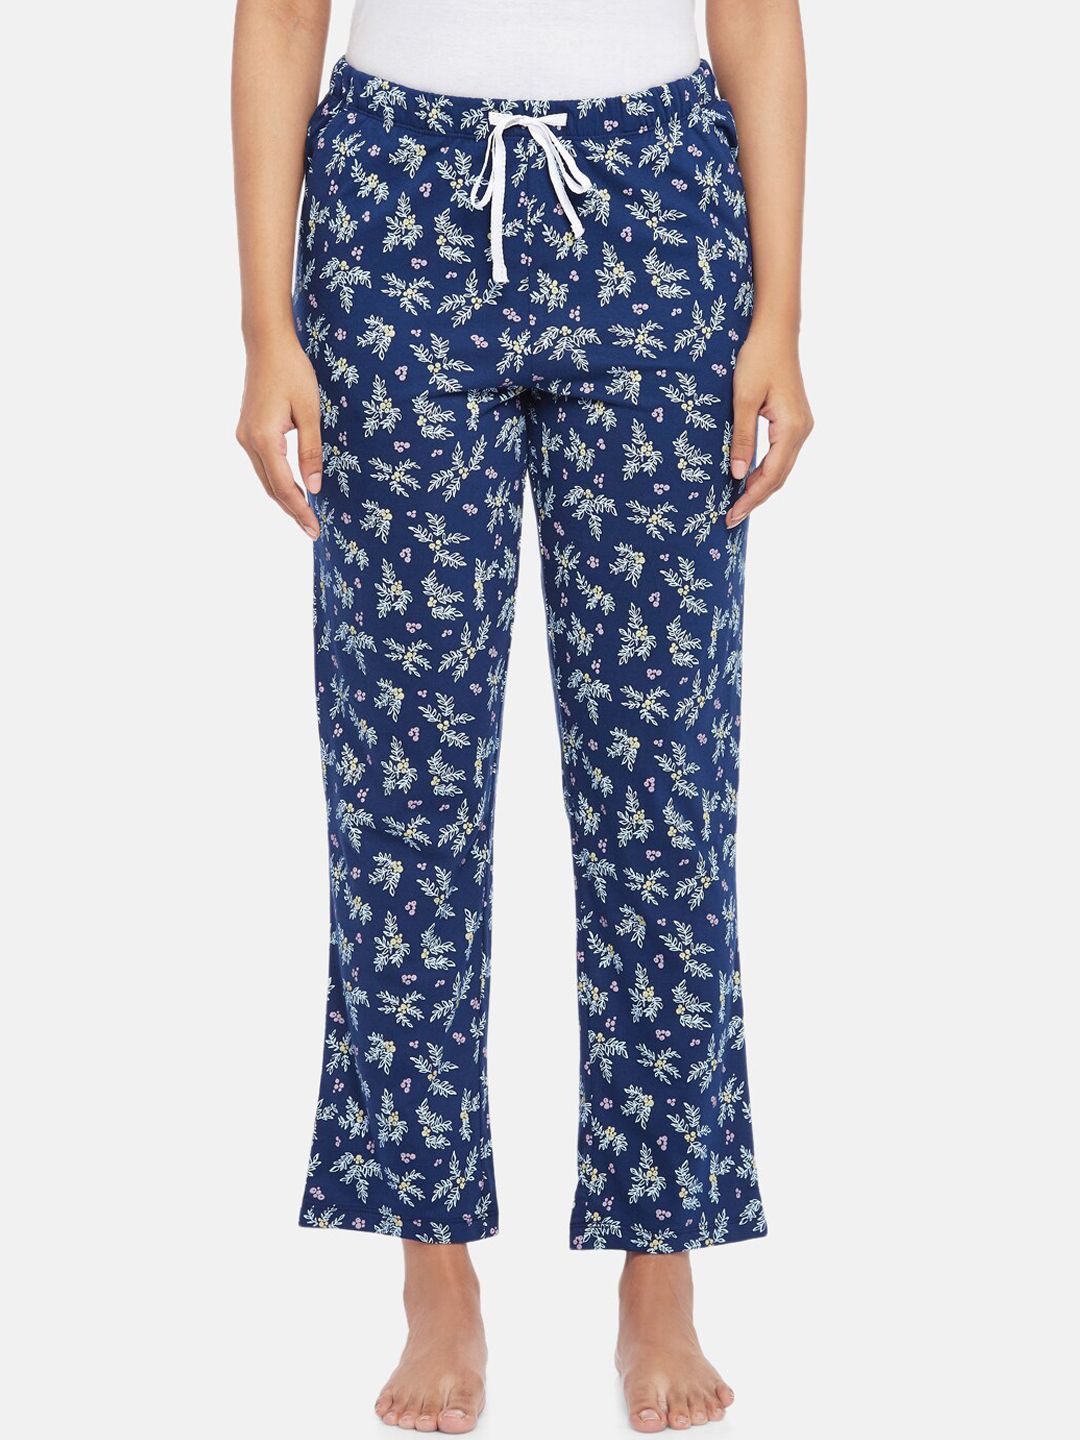 Dreamz by Pantaloons Women Navy Blue Floral Printed Lounge Pants Price in India